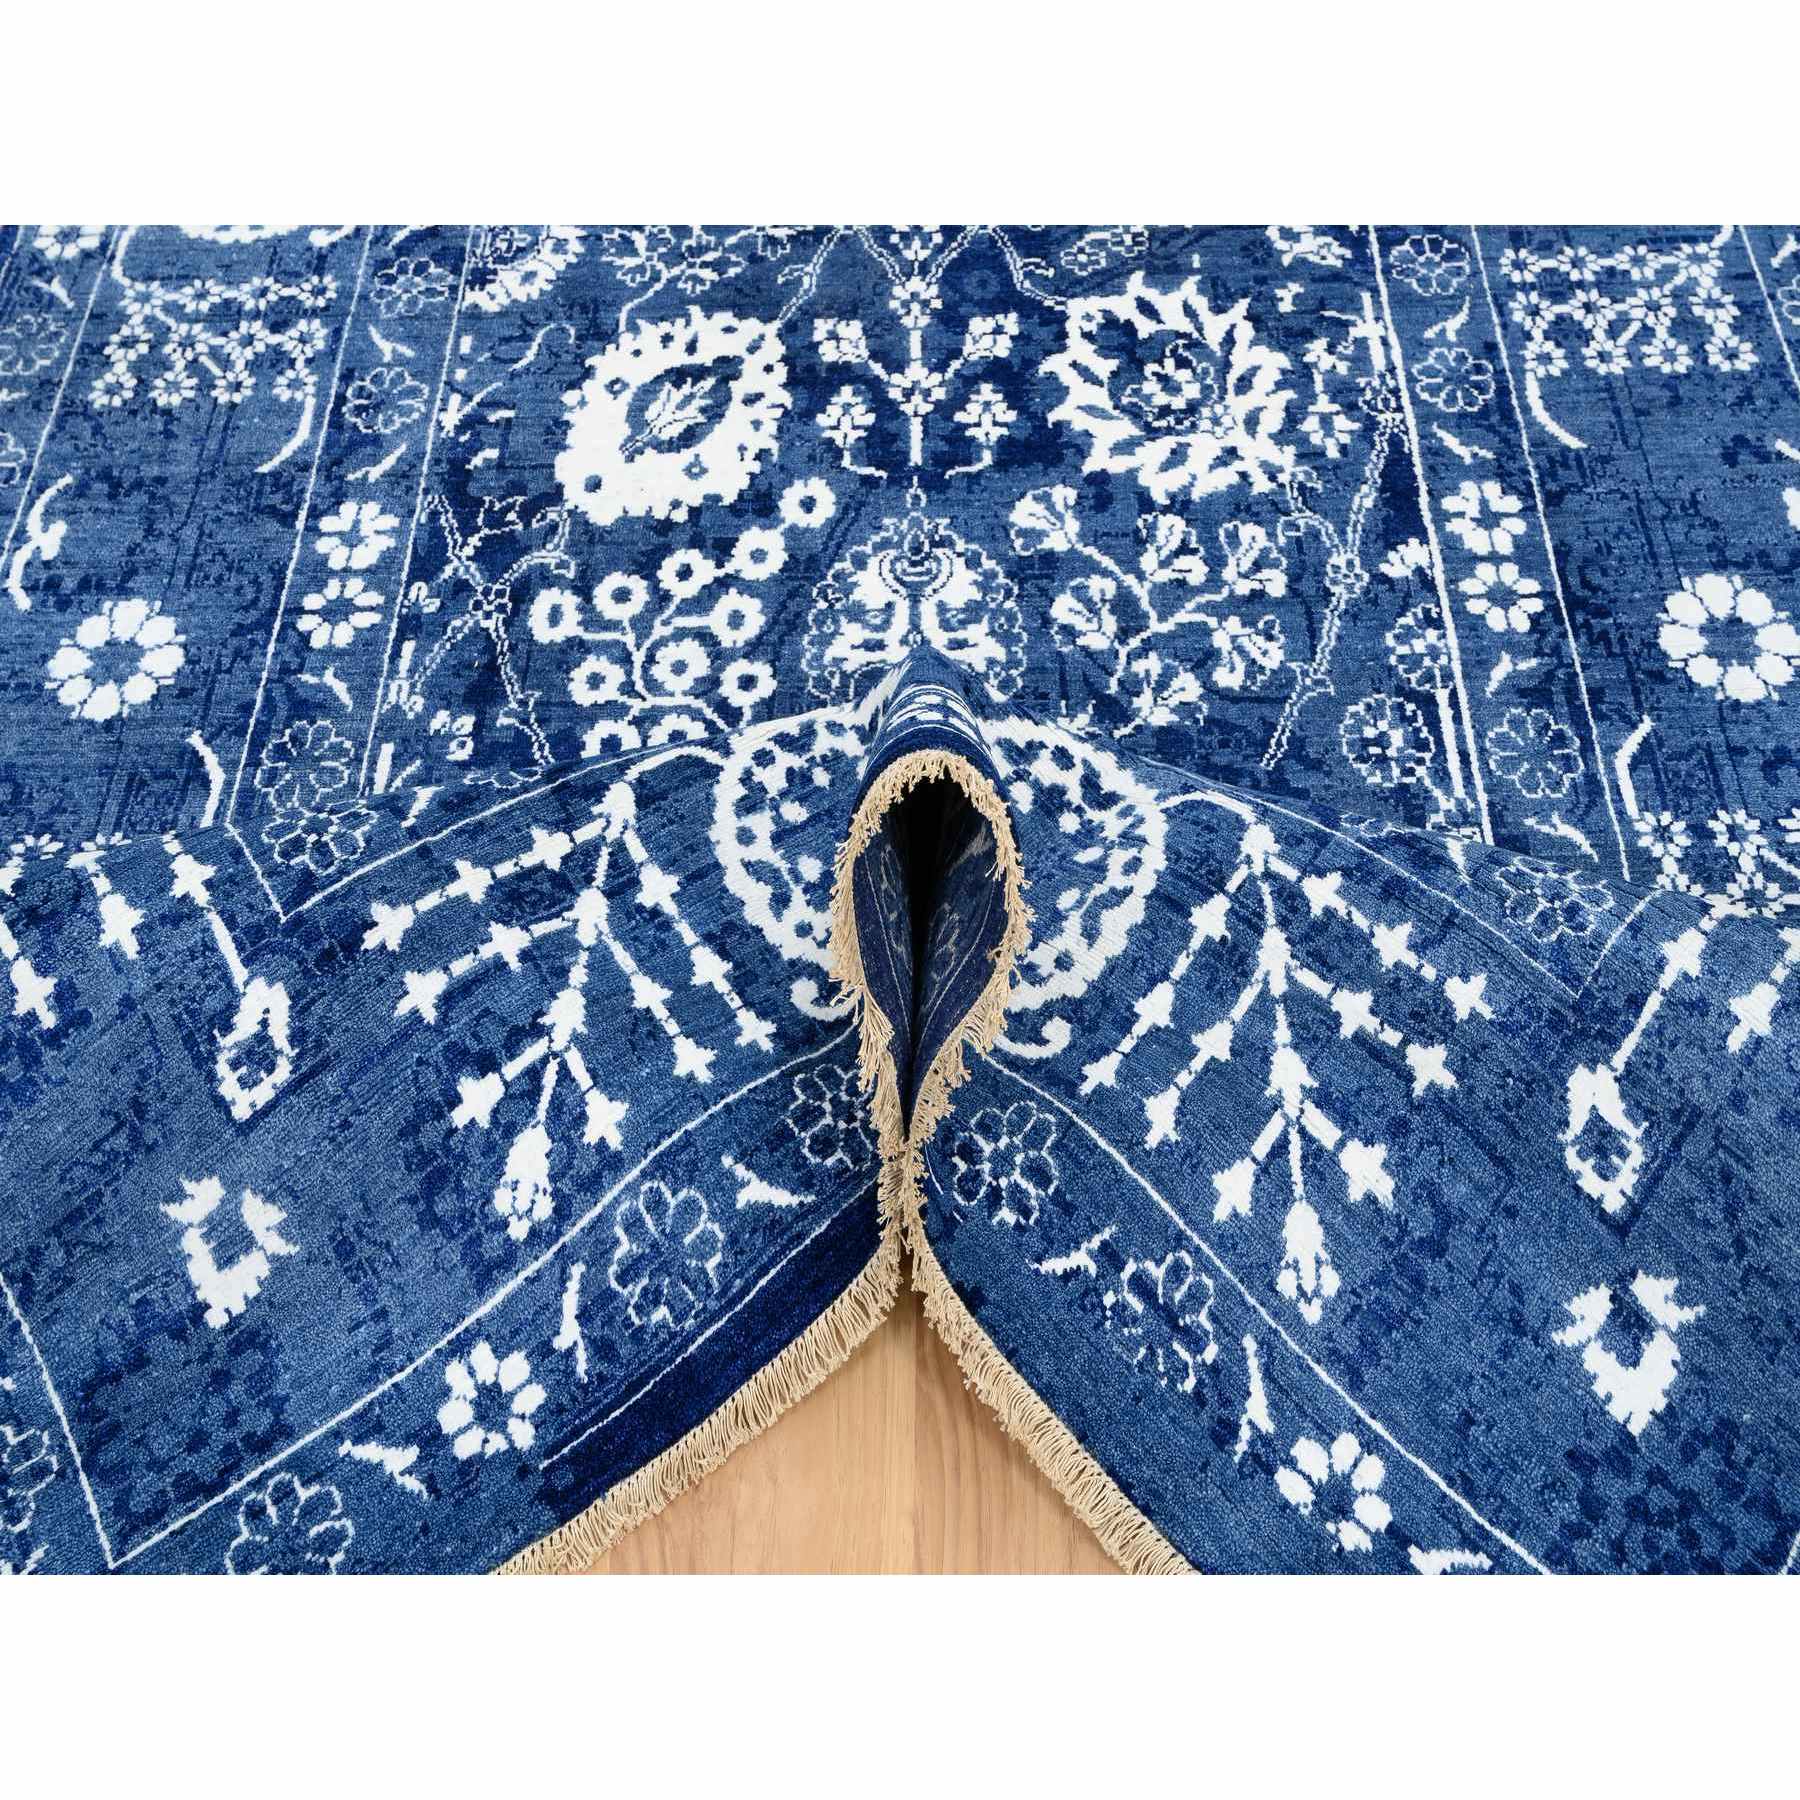 6'3"x12' Denim Blue, Tone on Tone Wool and Silk, Hand Woven Tabriz with All Over Motifs, Gallery Size Runner Oriental Rug 